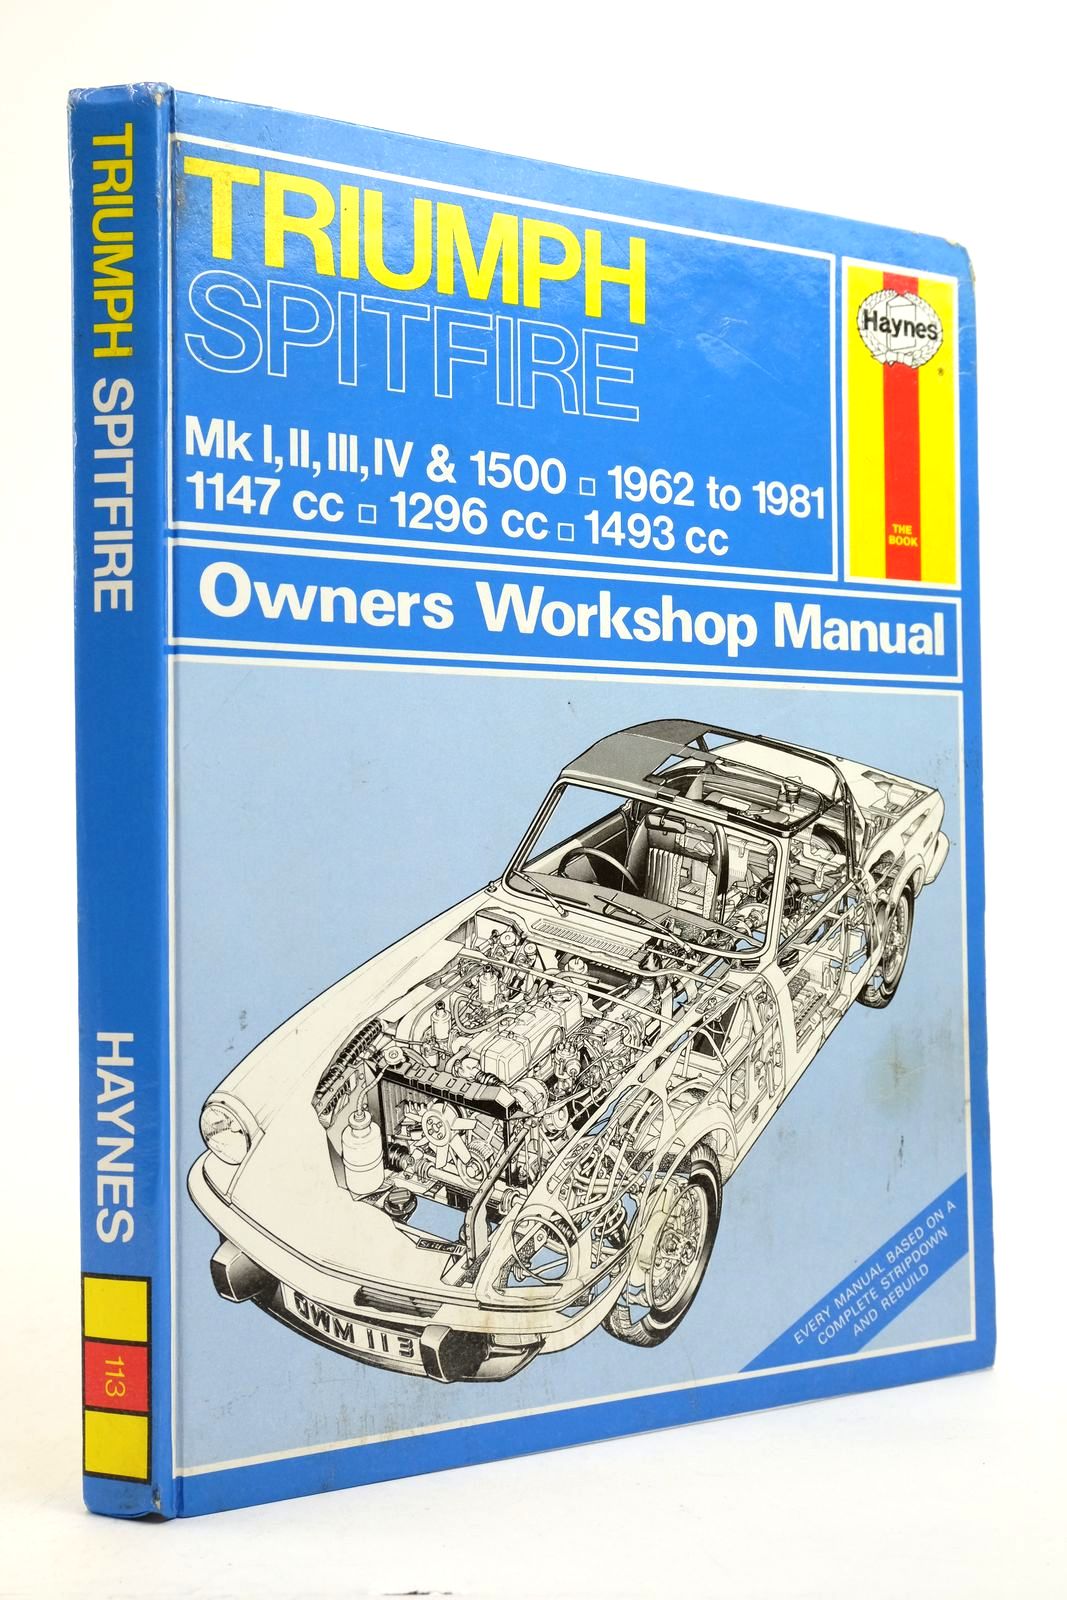 Photo of TRIUMPH SPITFIRE OWNERS WORKSHOP MANUAL written by Strasman, Peter Haynes, J.H. published by Haynes Publishing Group (STOCK CODE: 2139279)  for sale by Stella & Rose's Books